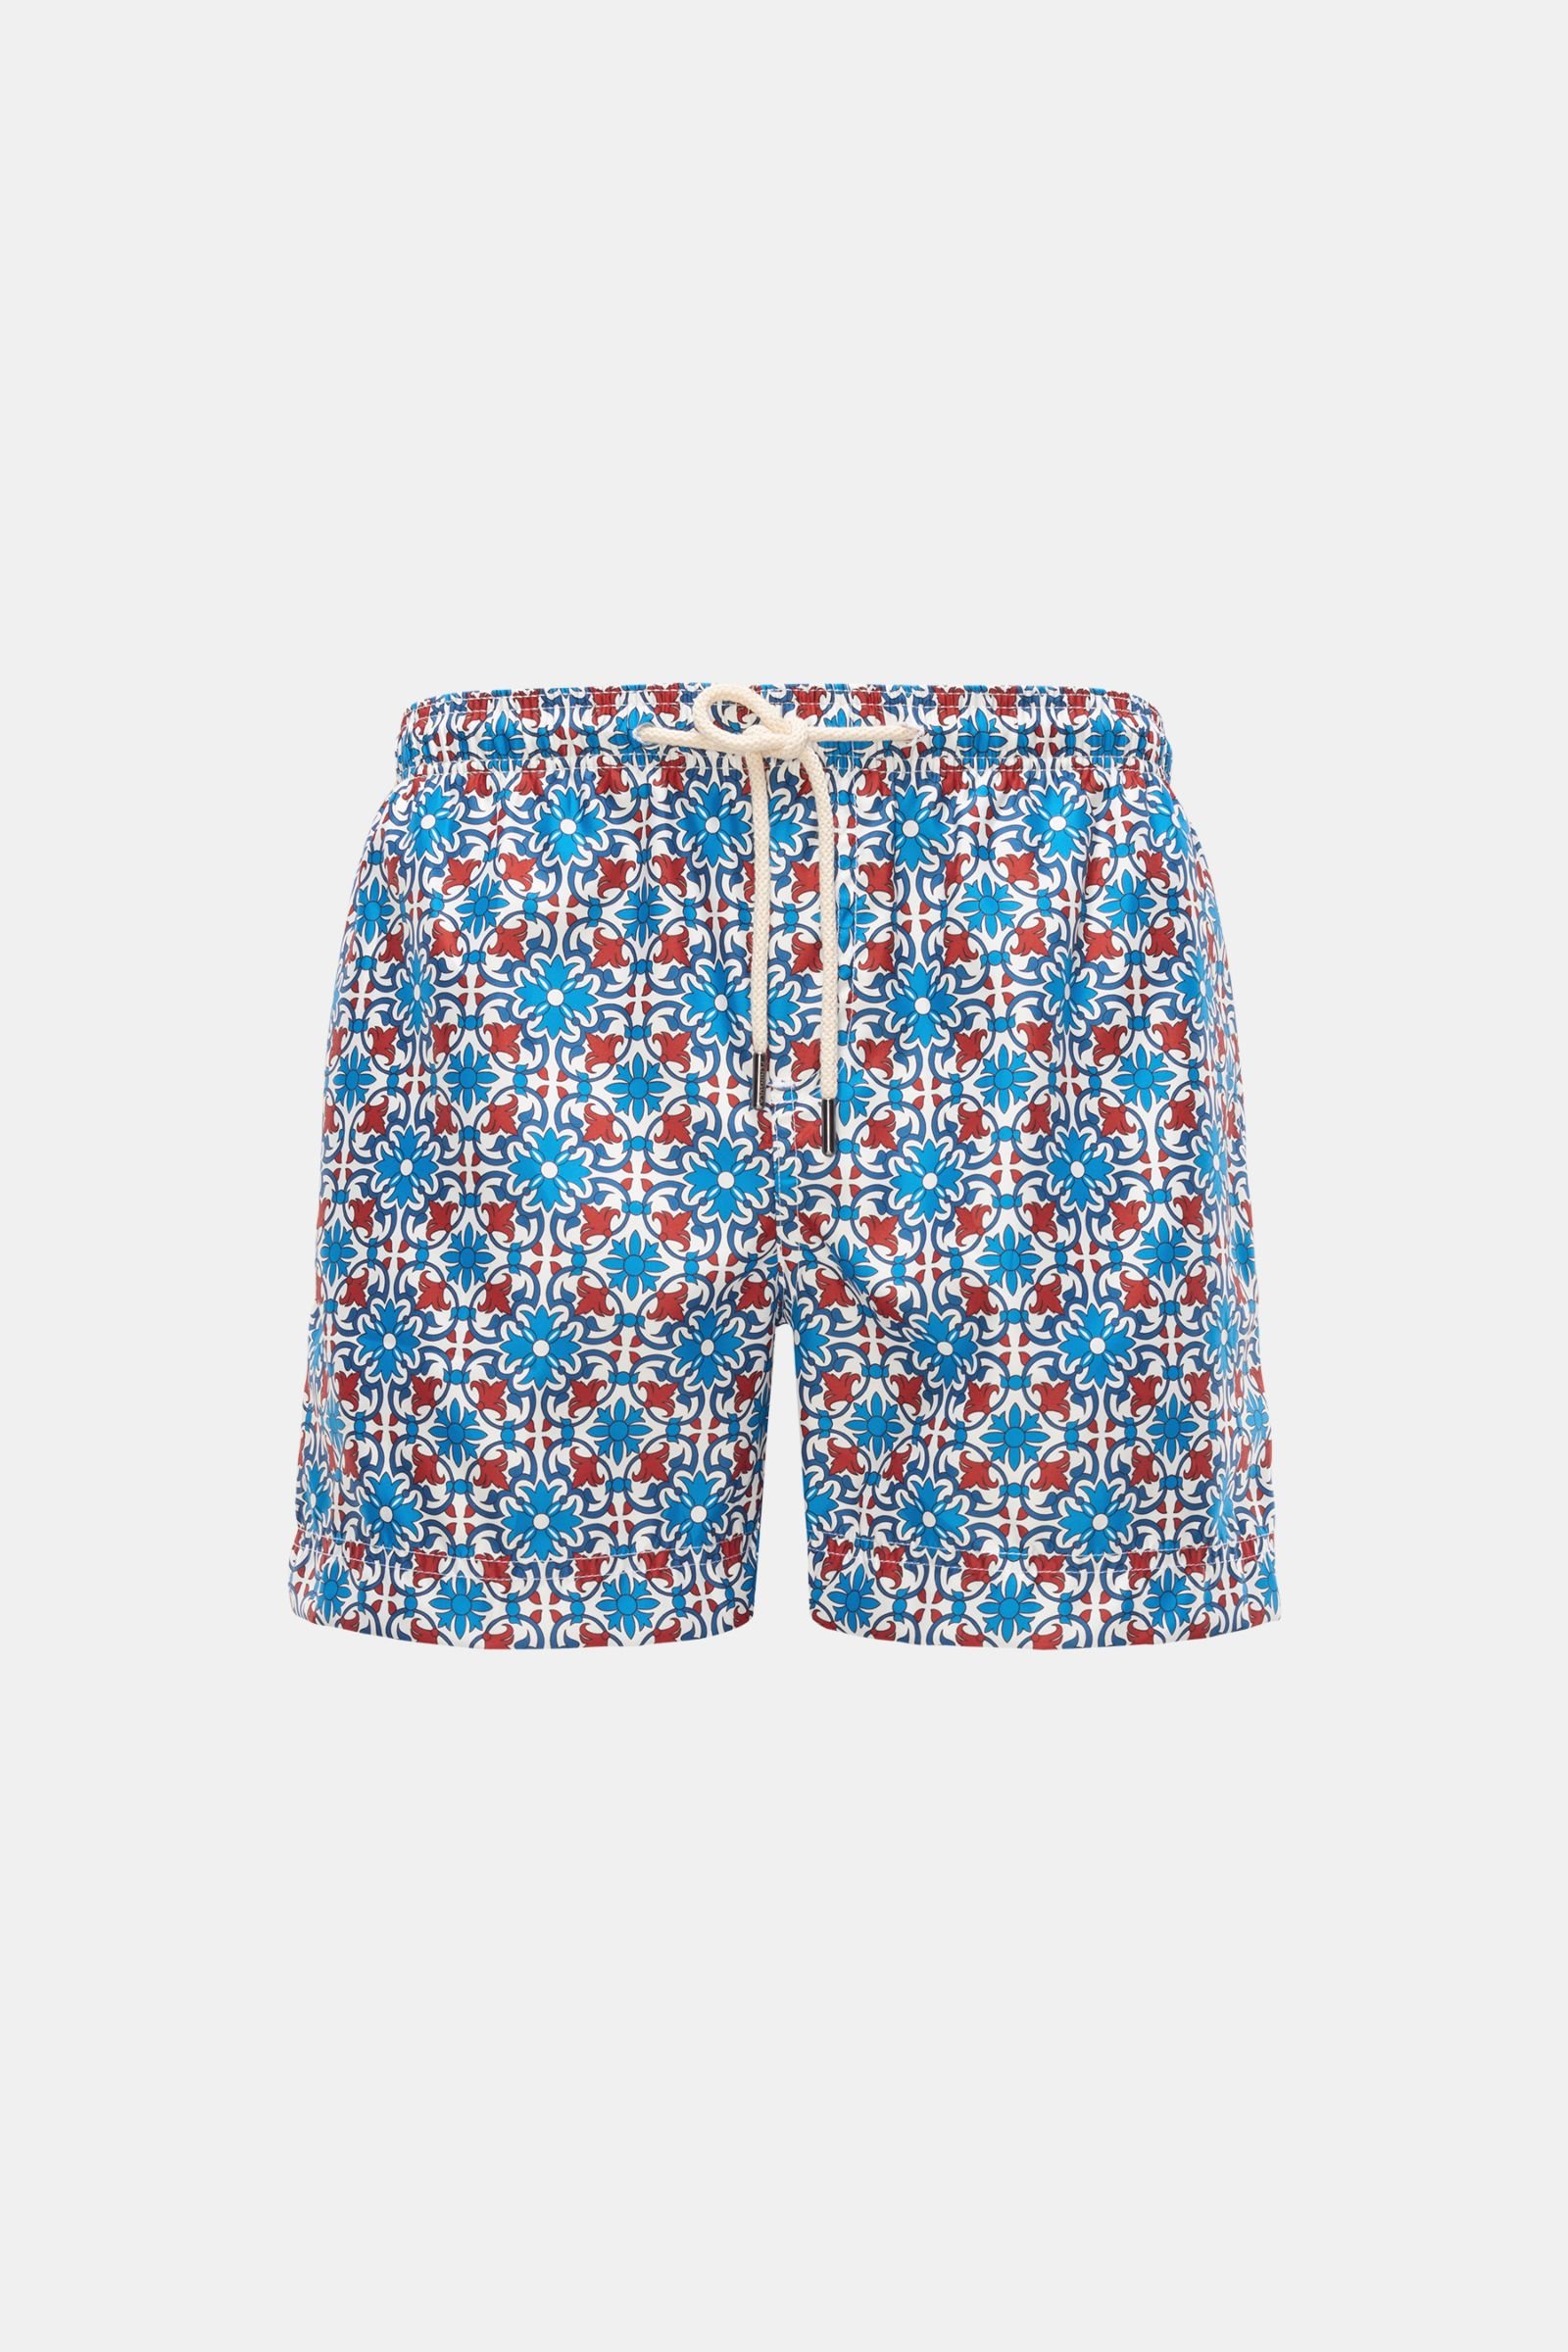 Swim shorts blue/red patterned 